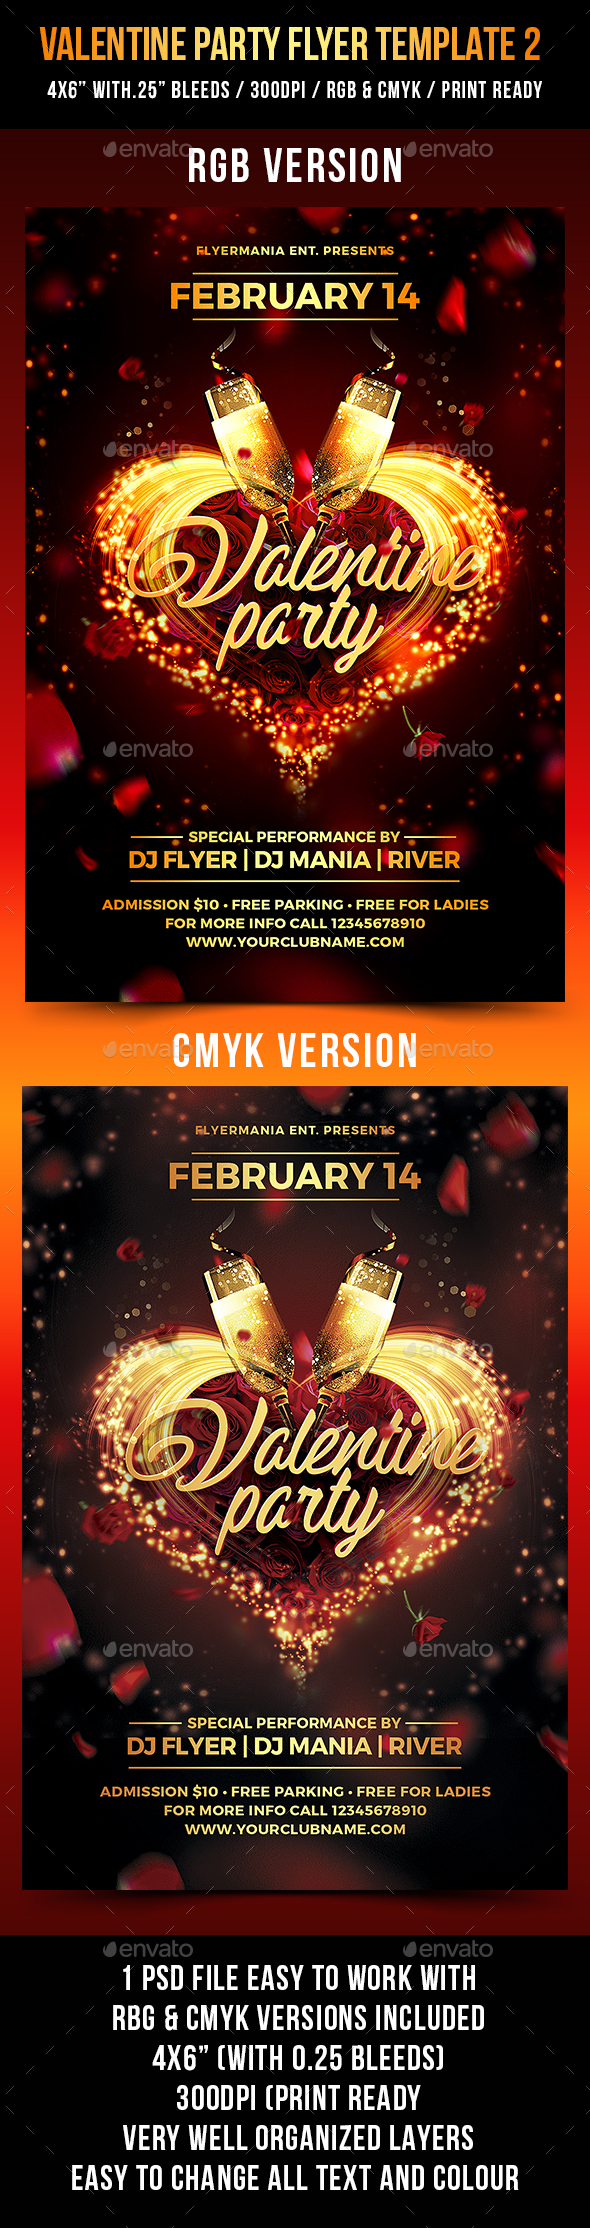 Valentine Party Flyer Template 2